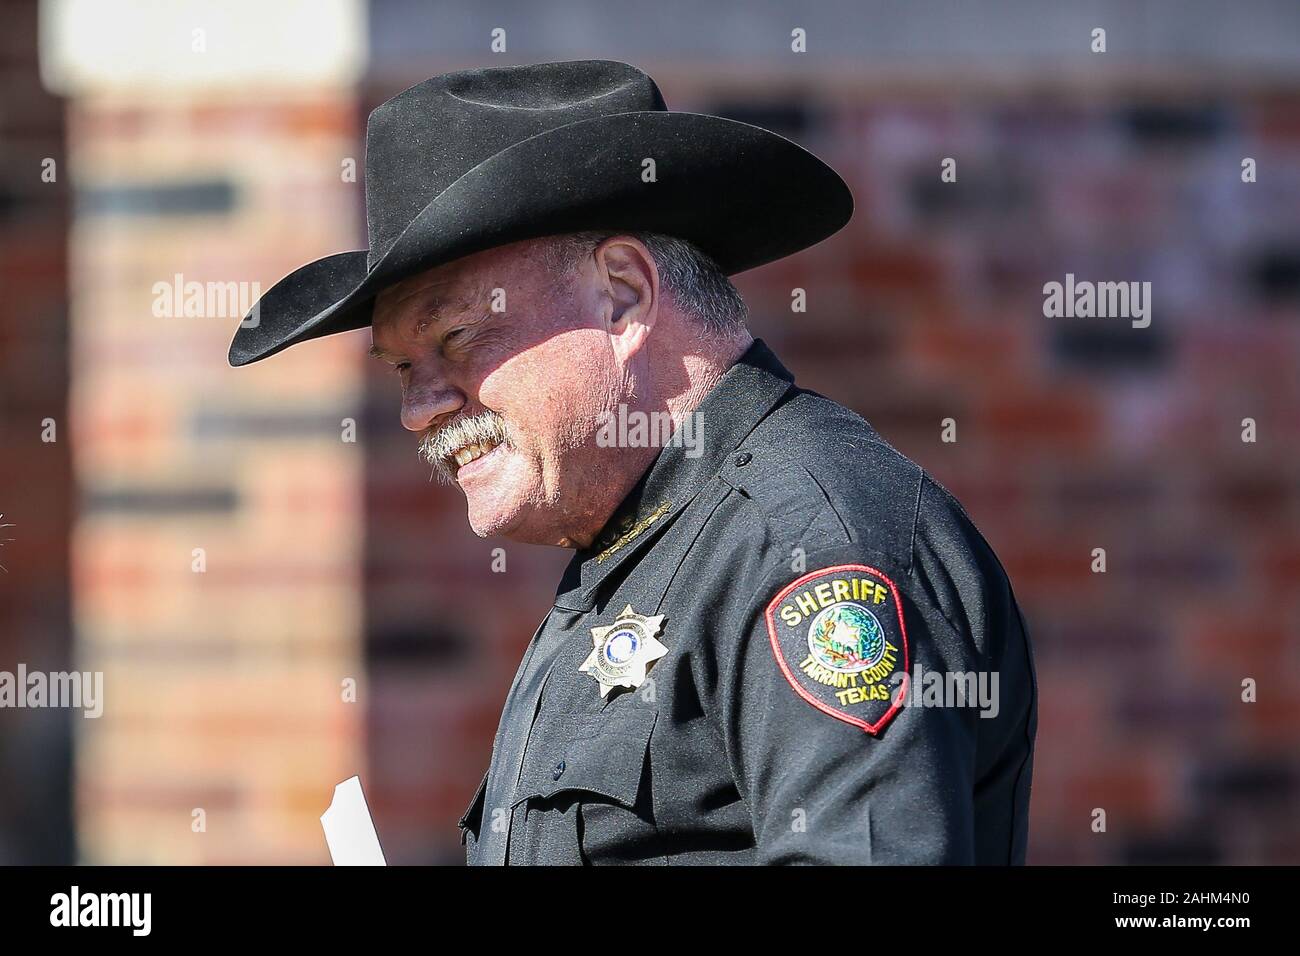 Dallas, Texas, USA. 30th Dec, 2019. Tarrant County Sheriff, Bill Waybourne, in action during the Servpro First Responder Bowl game between Western Michigan Broncos and the Western Kentucky Hilltoppers at the gerald Ford Stadiuml Stadium in Dallas, Texas. Credit: Dan Wozniak/ZUMA Wire/Alamy Live News Stock Photo